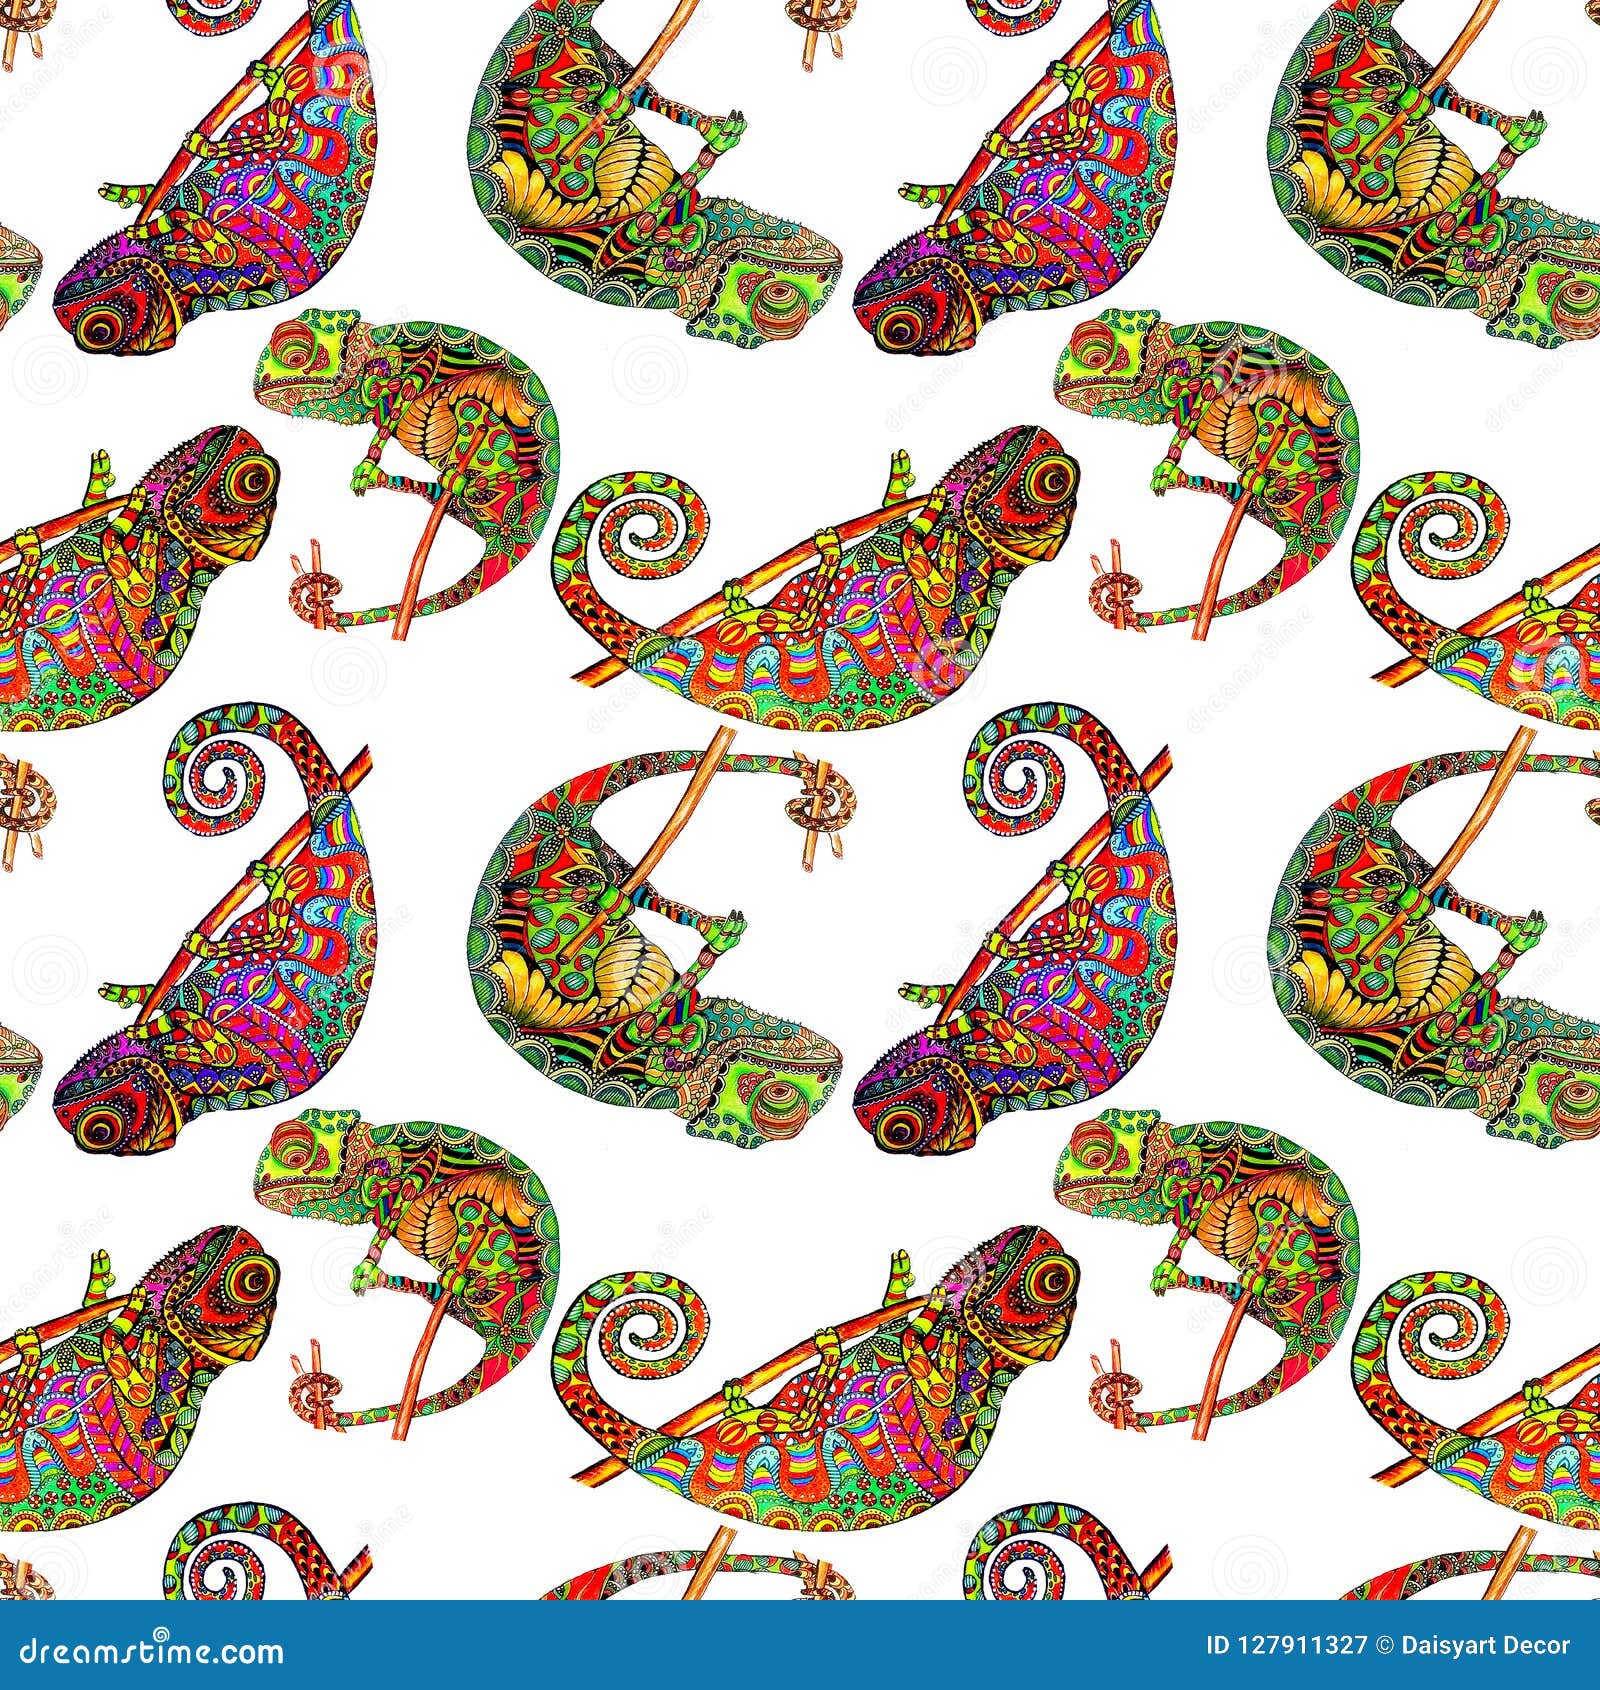 Colored Zentangle Chameleon Seamless Pattern. Doodle Exotic Wild Animal